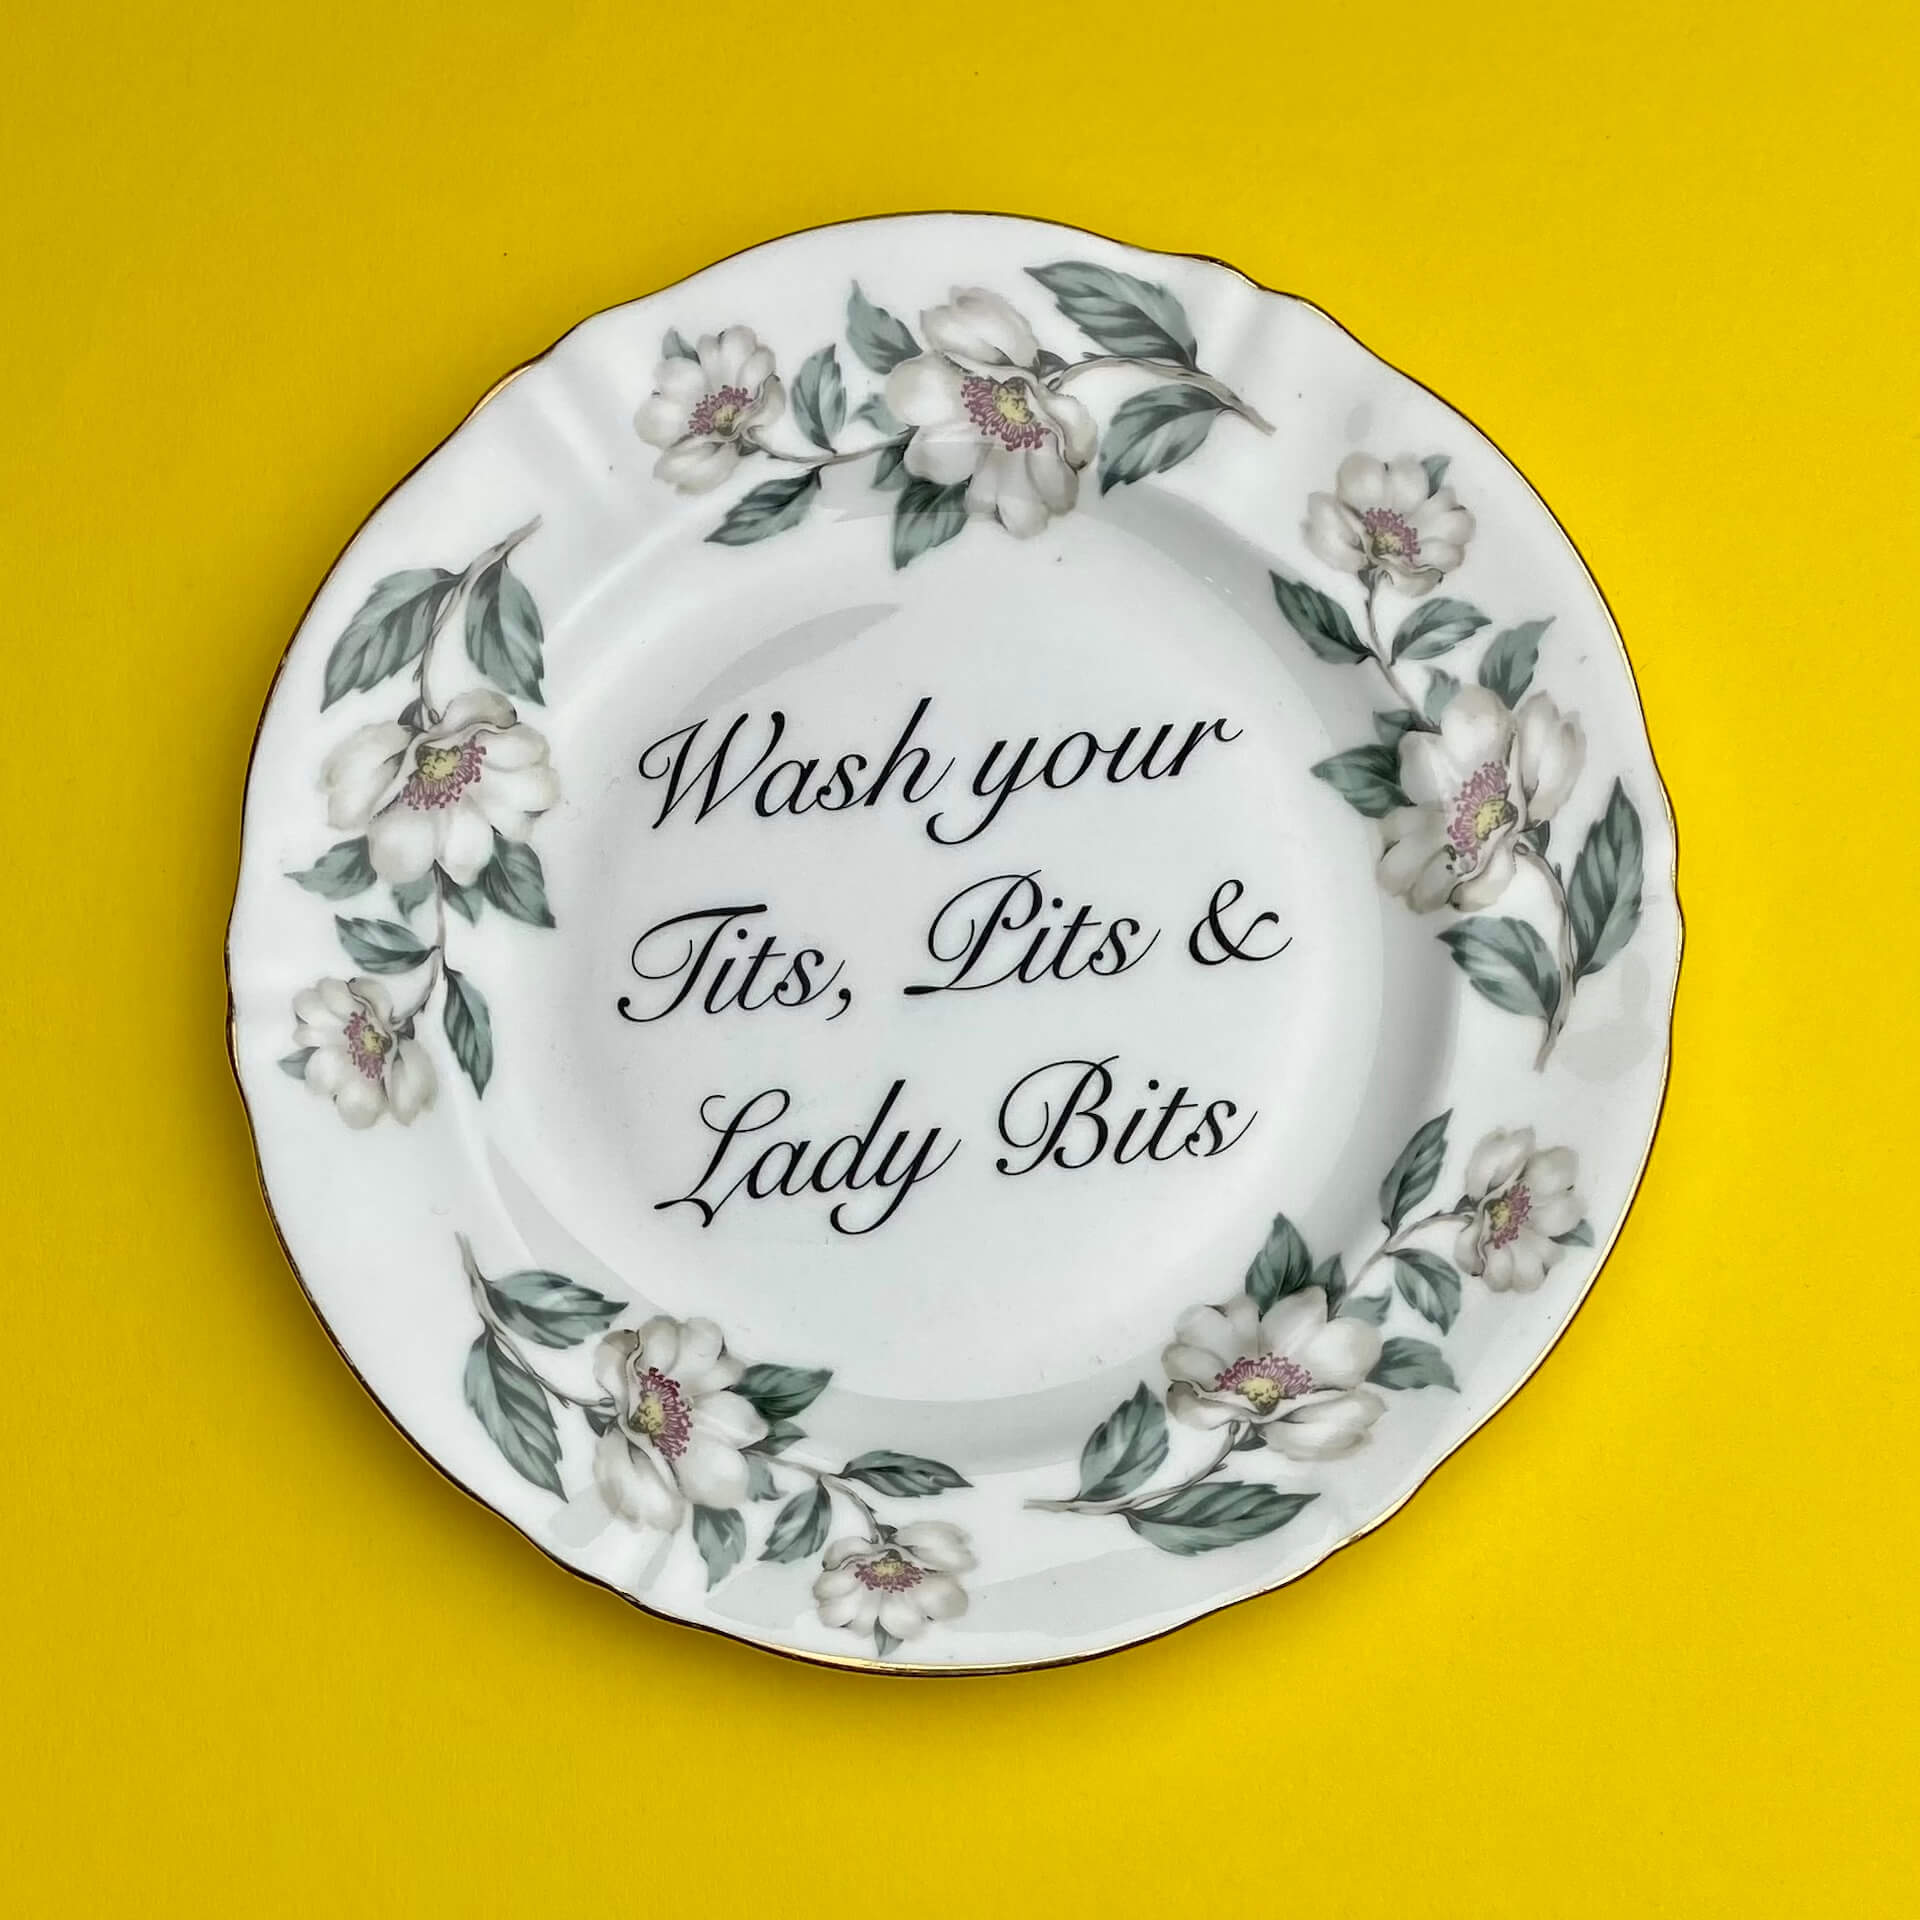 Beau & Badger Ceramics B (not pictured) Decorative Wall Plate - Wash Your T*ts, Pits & Lady Bits (various styles)